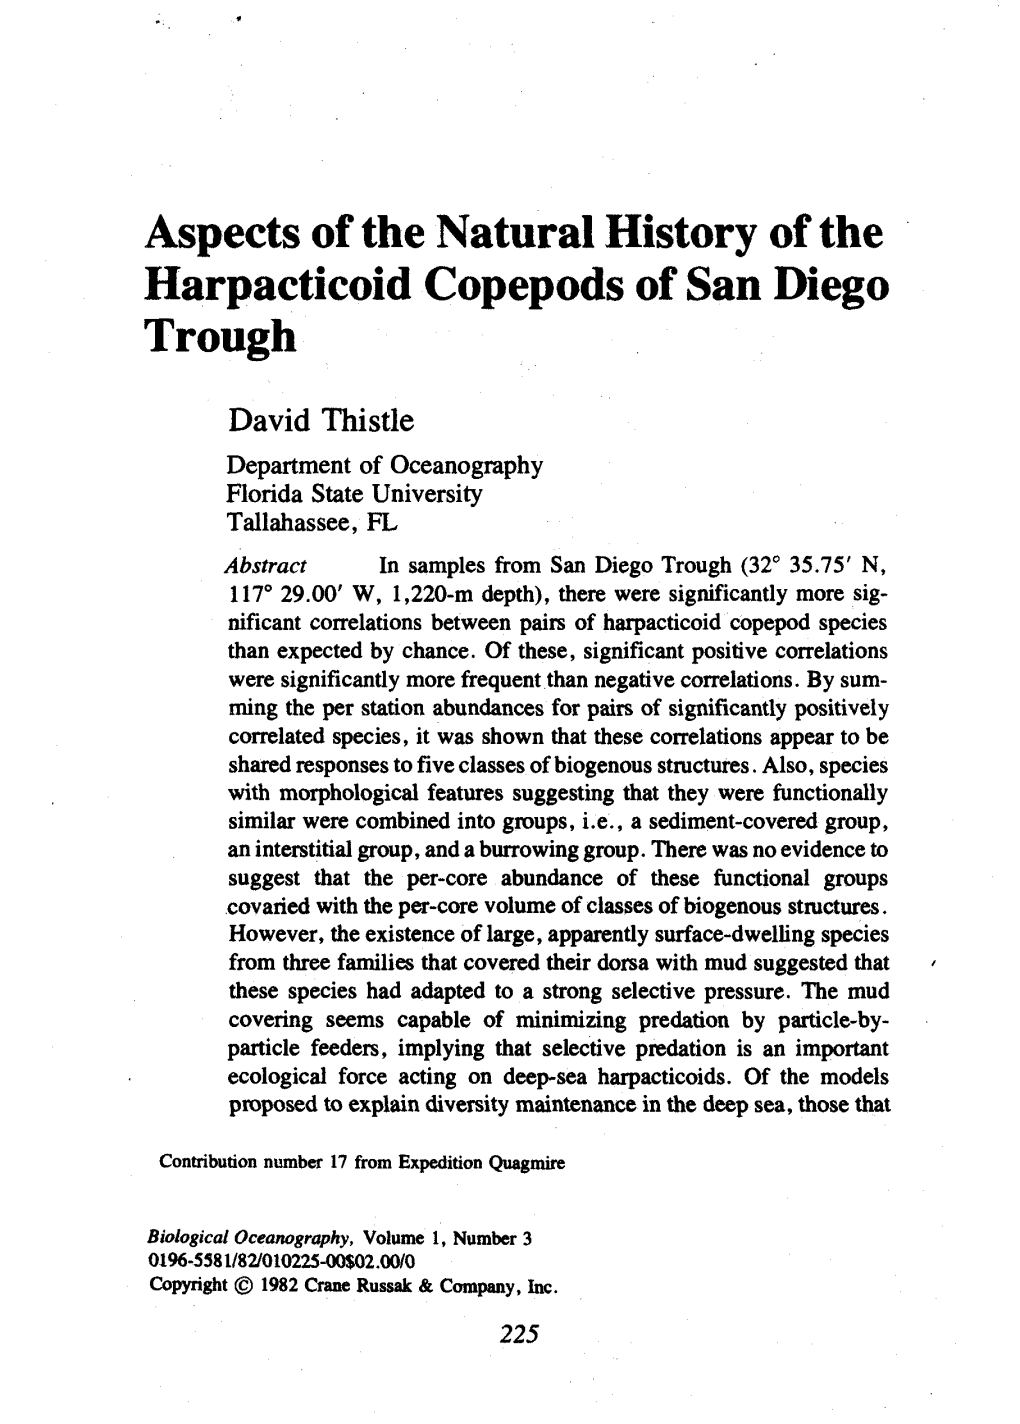 Aspects of the Natural History of the Harpacticoid Copepods of San Diego Trough